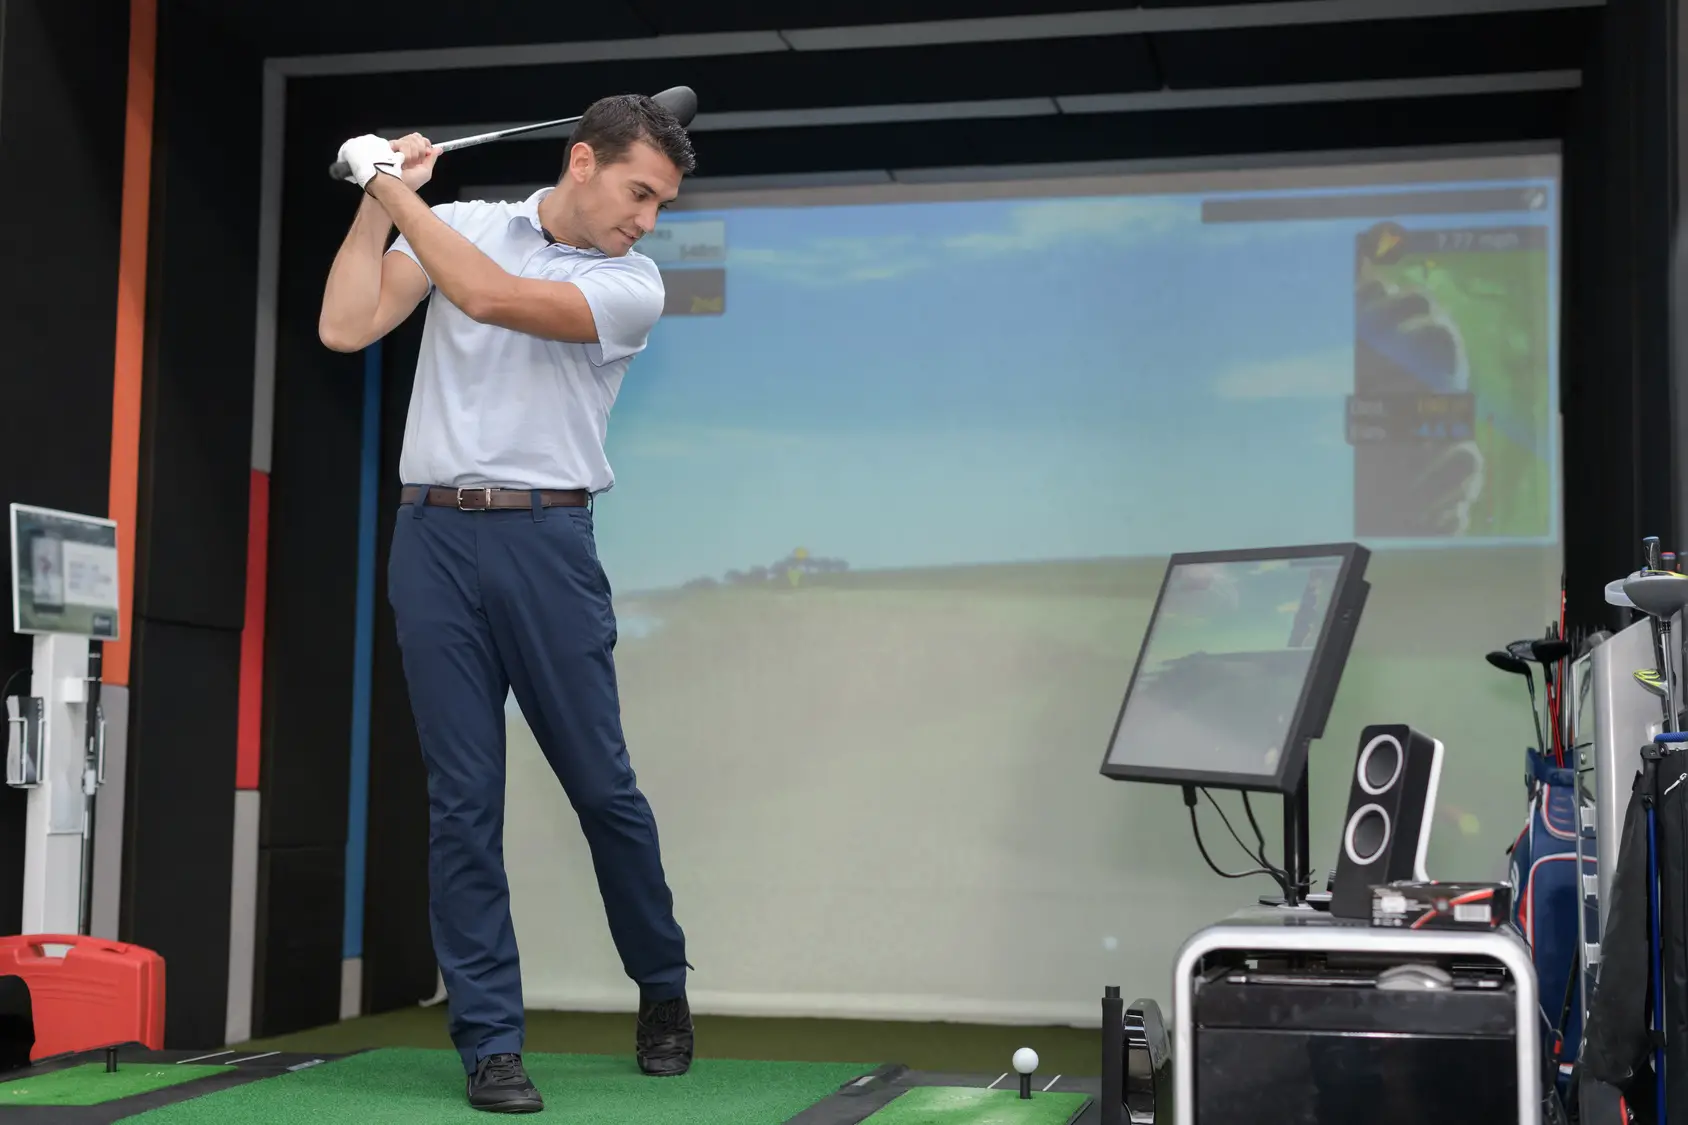 Golf Simulator Space Requirements and Room Design